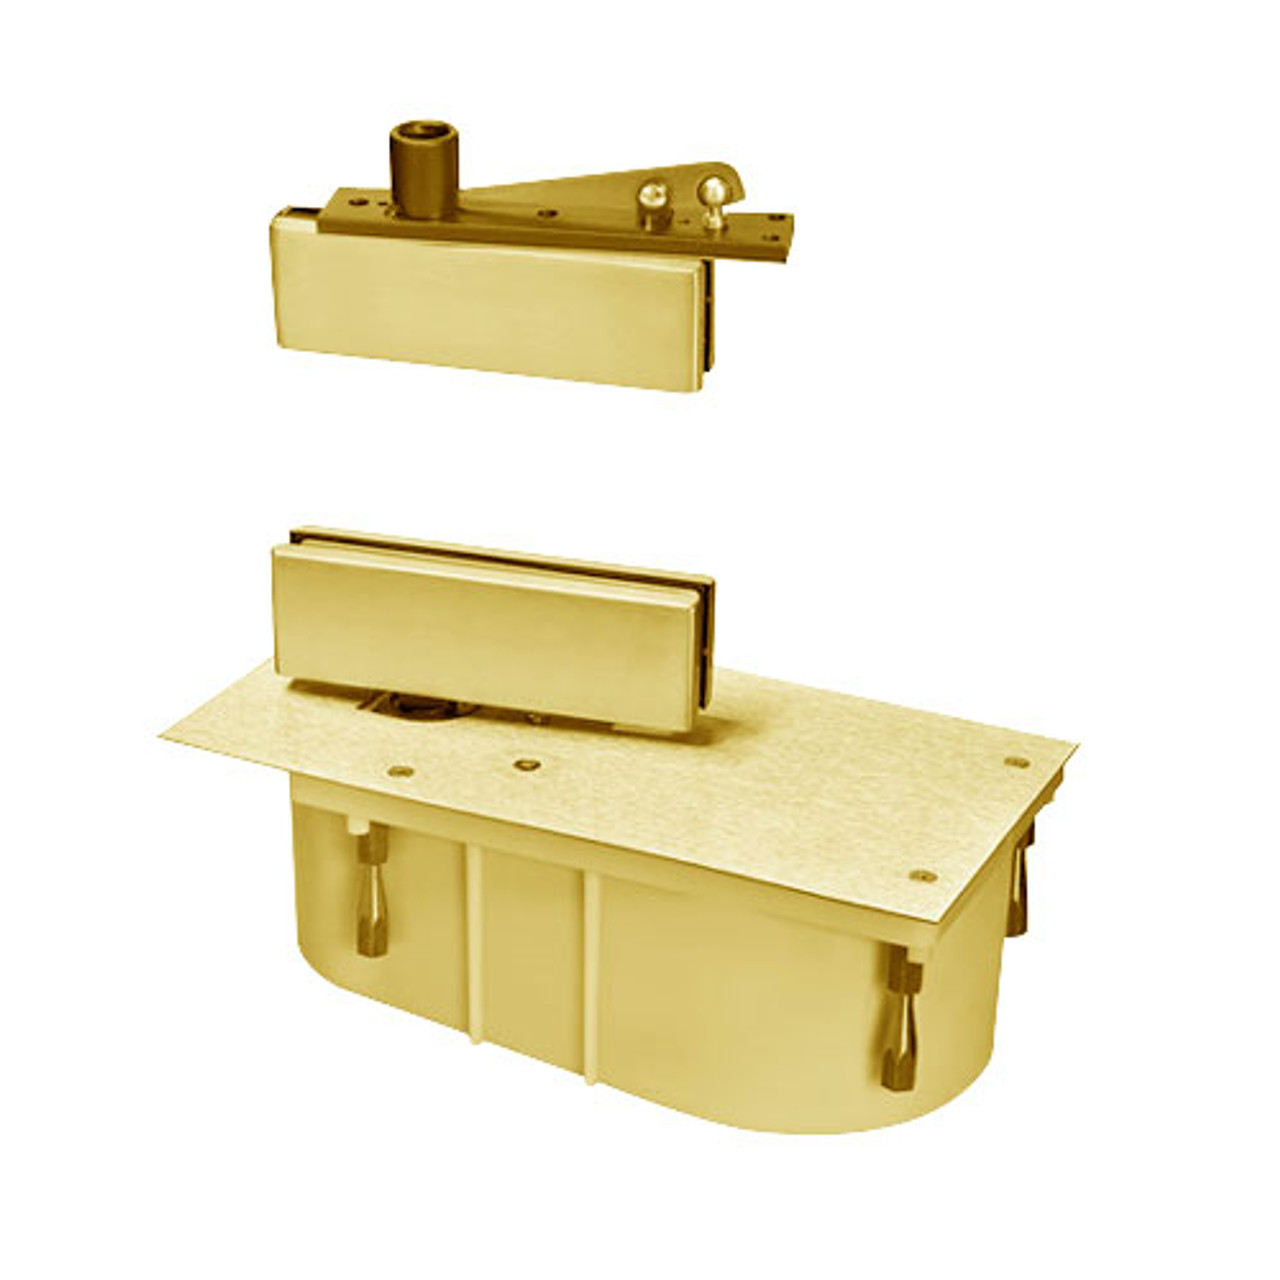 SC428-105S-CWF-RH-605 Rixson 428 Series Heavy Duty Single Acting Center Hung Floor Closer with Patch Fittings in Bright Brass Finish